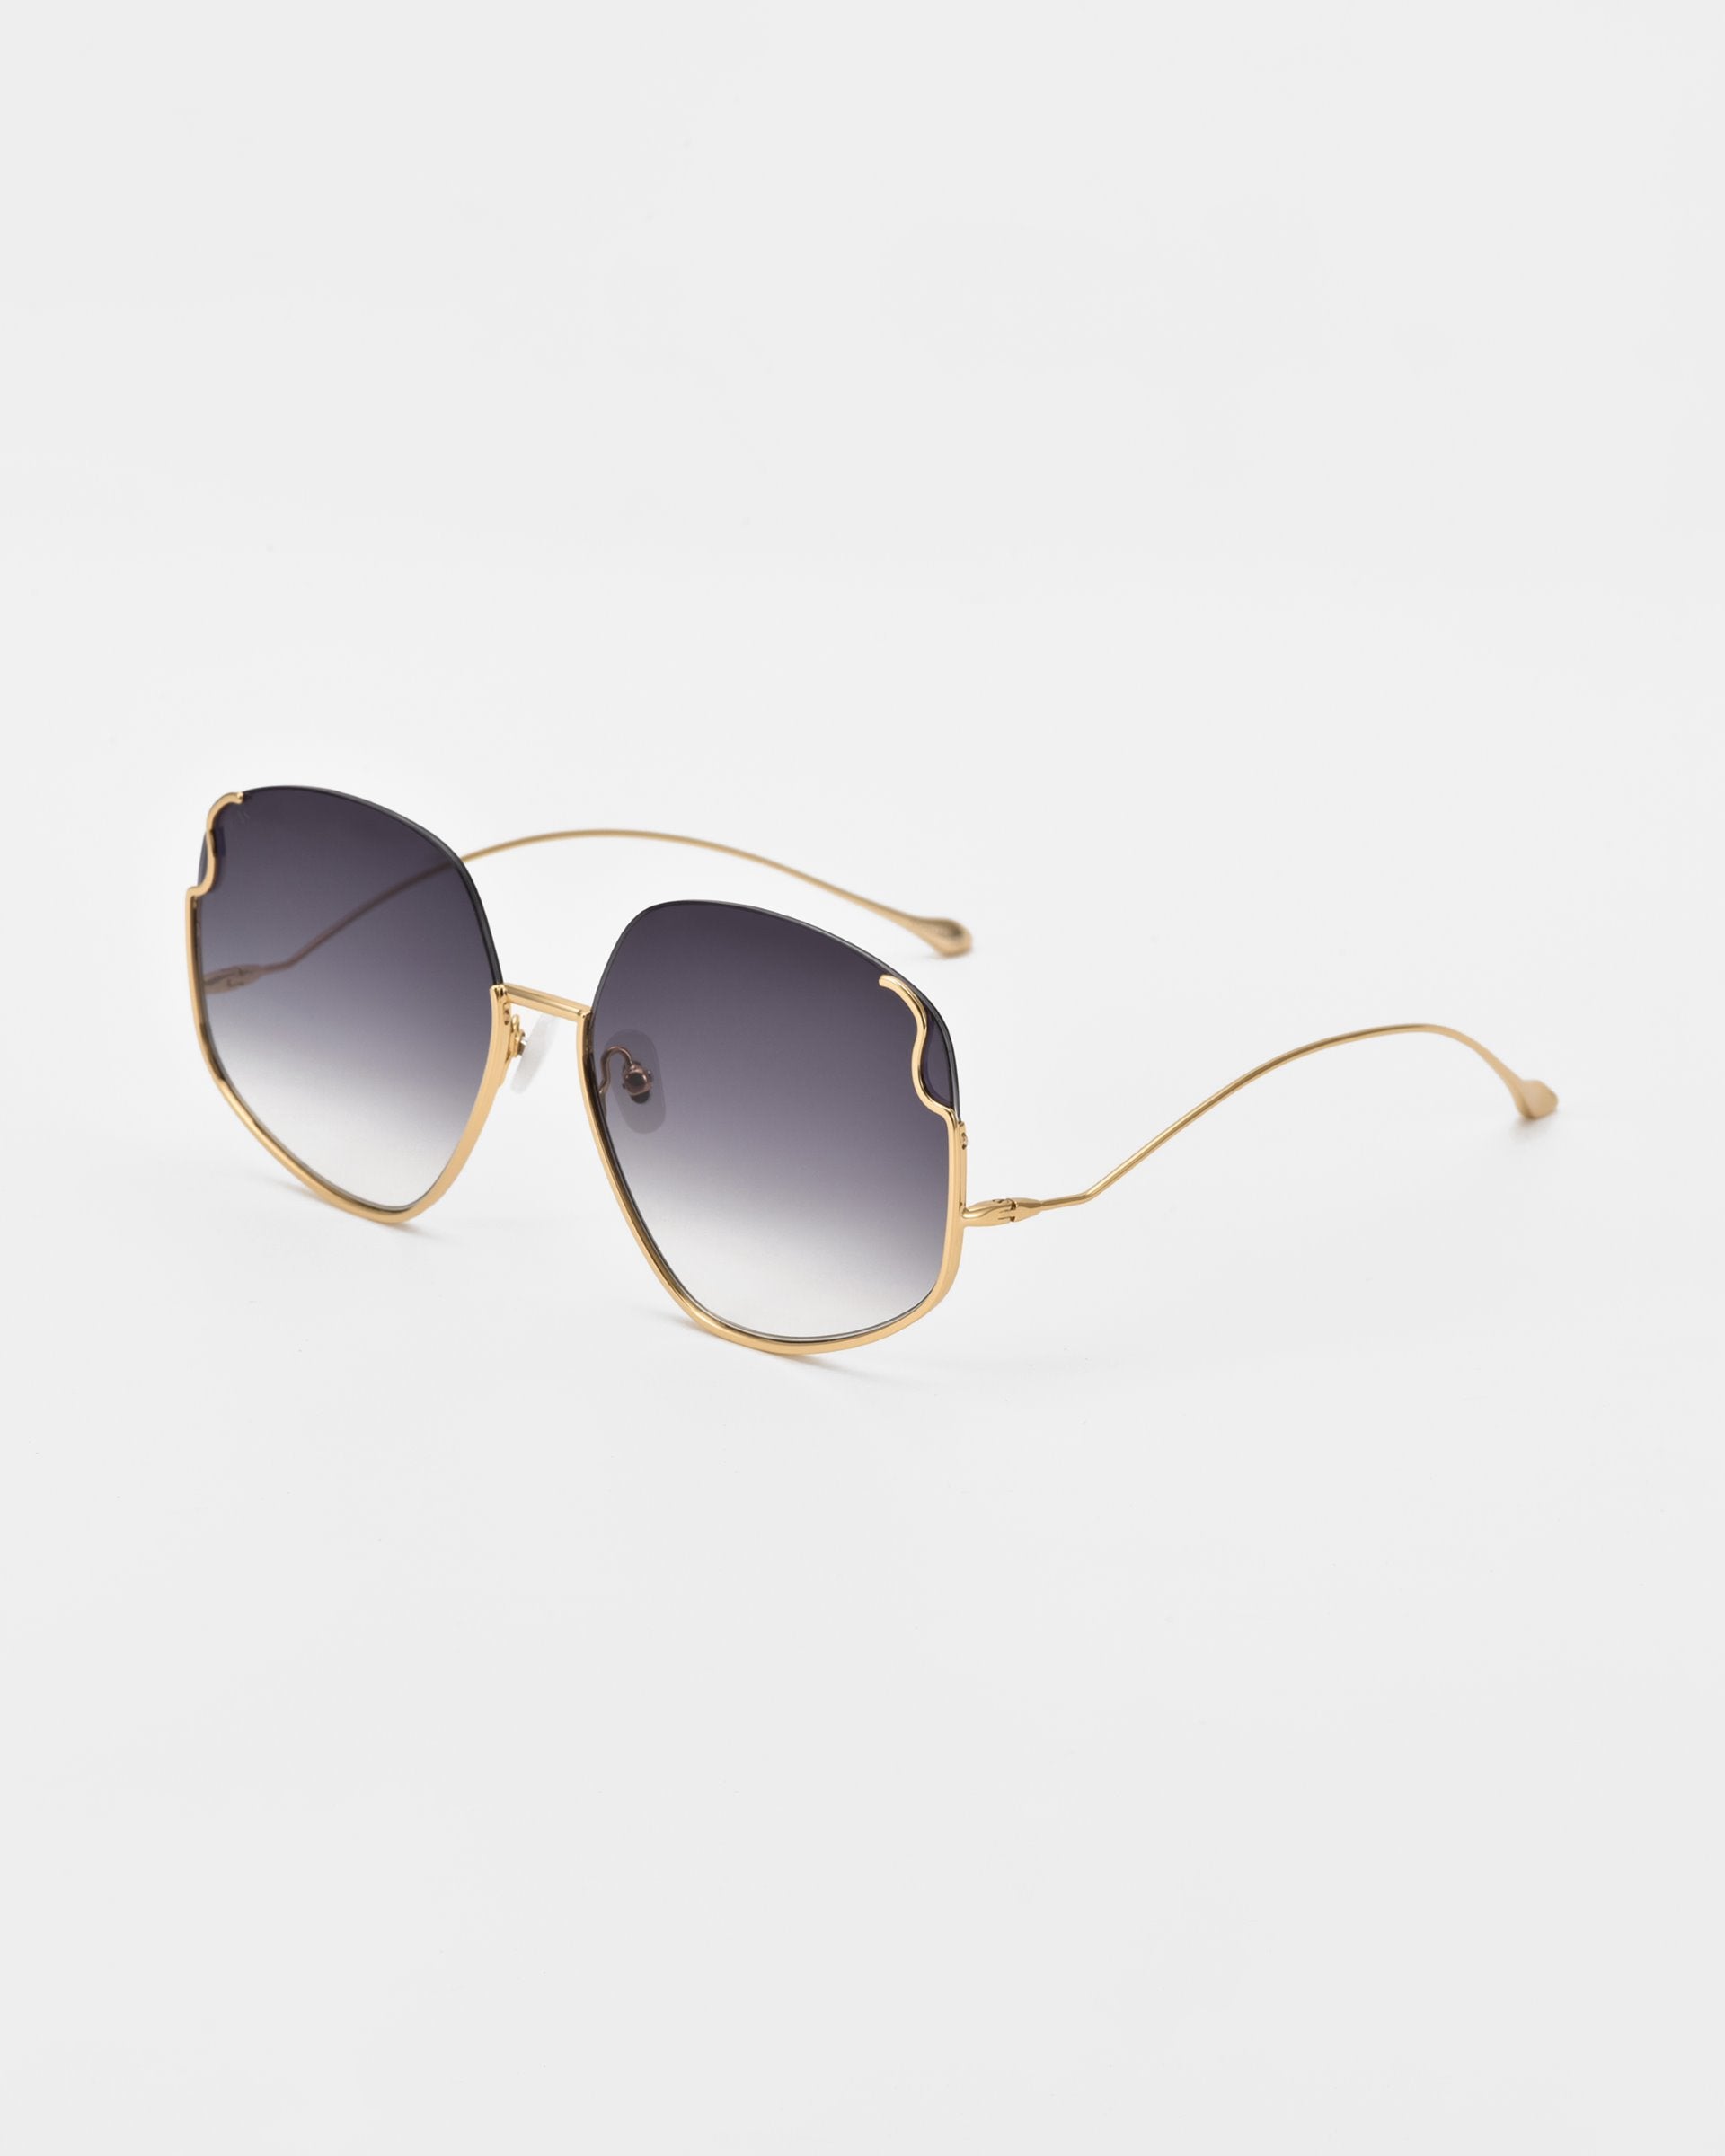 A pair of luxurious For Art&#39;s Sake® Drape sunglasses with gold metal frames and dark gradient lenses. The frames feature intricate metal detailing and a unique, slightly irregular shape at the top edges. The elegant arms are thin and curve towards the back ends, where there are small, rounded tips. These sunglasses are set against a plain white background.